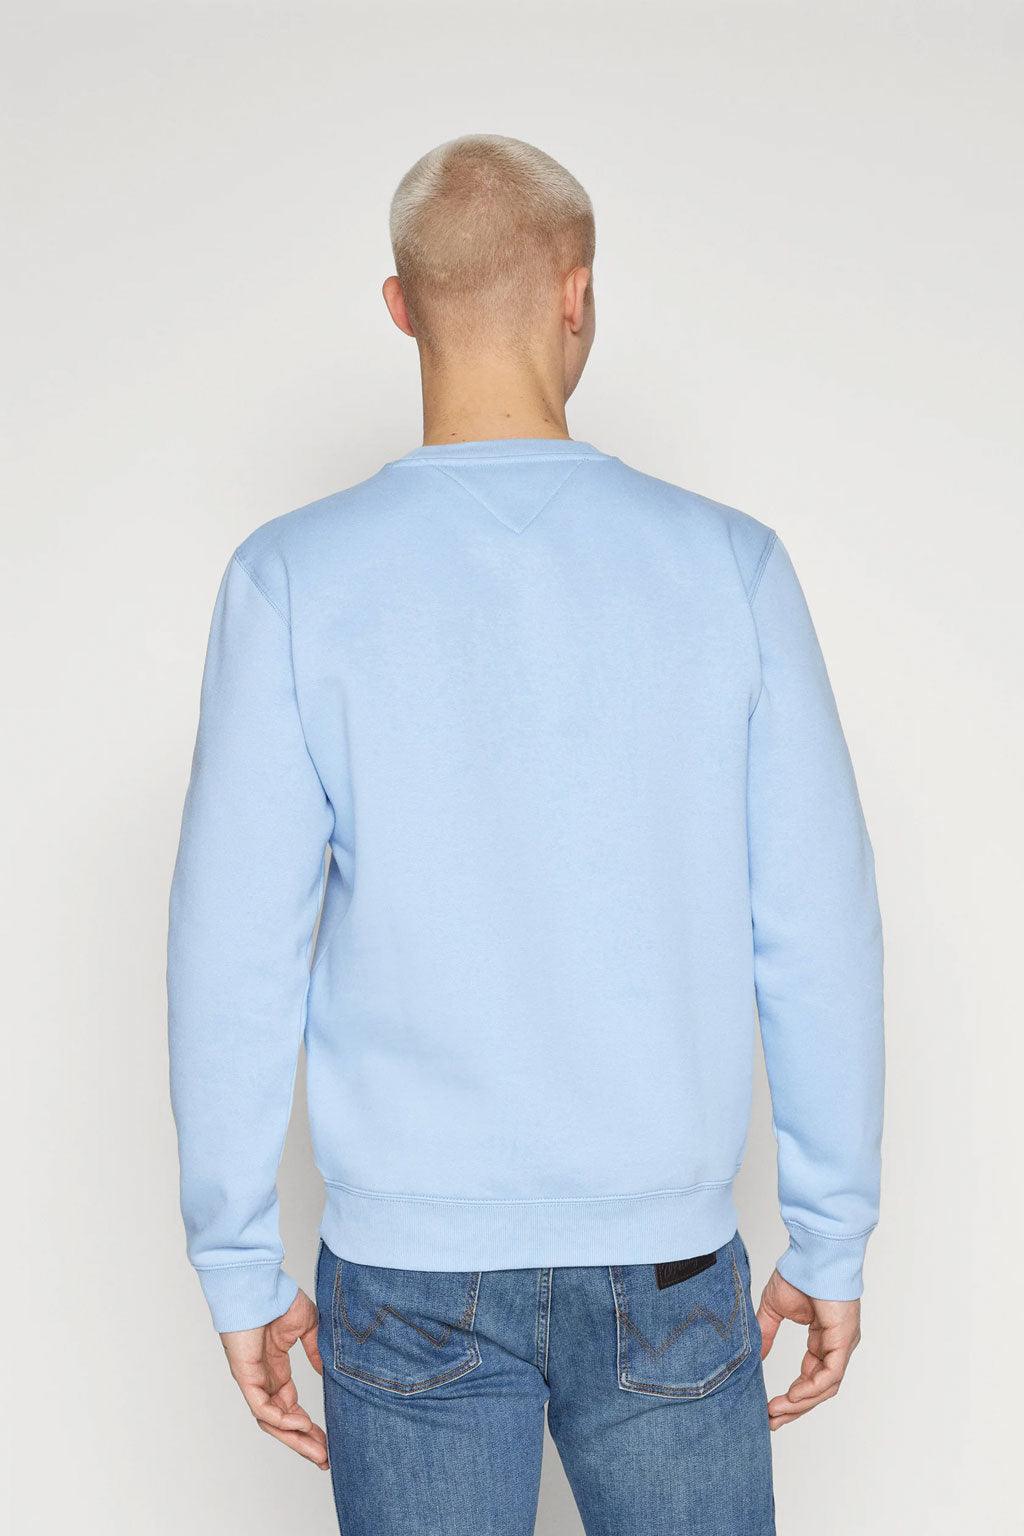 Tommy Jeans sweater - Big Boss | the menswear concept